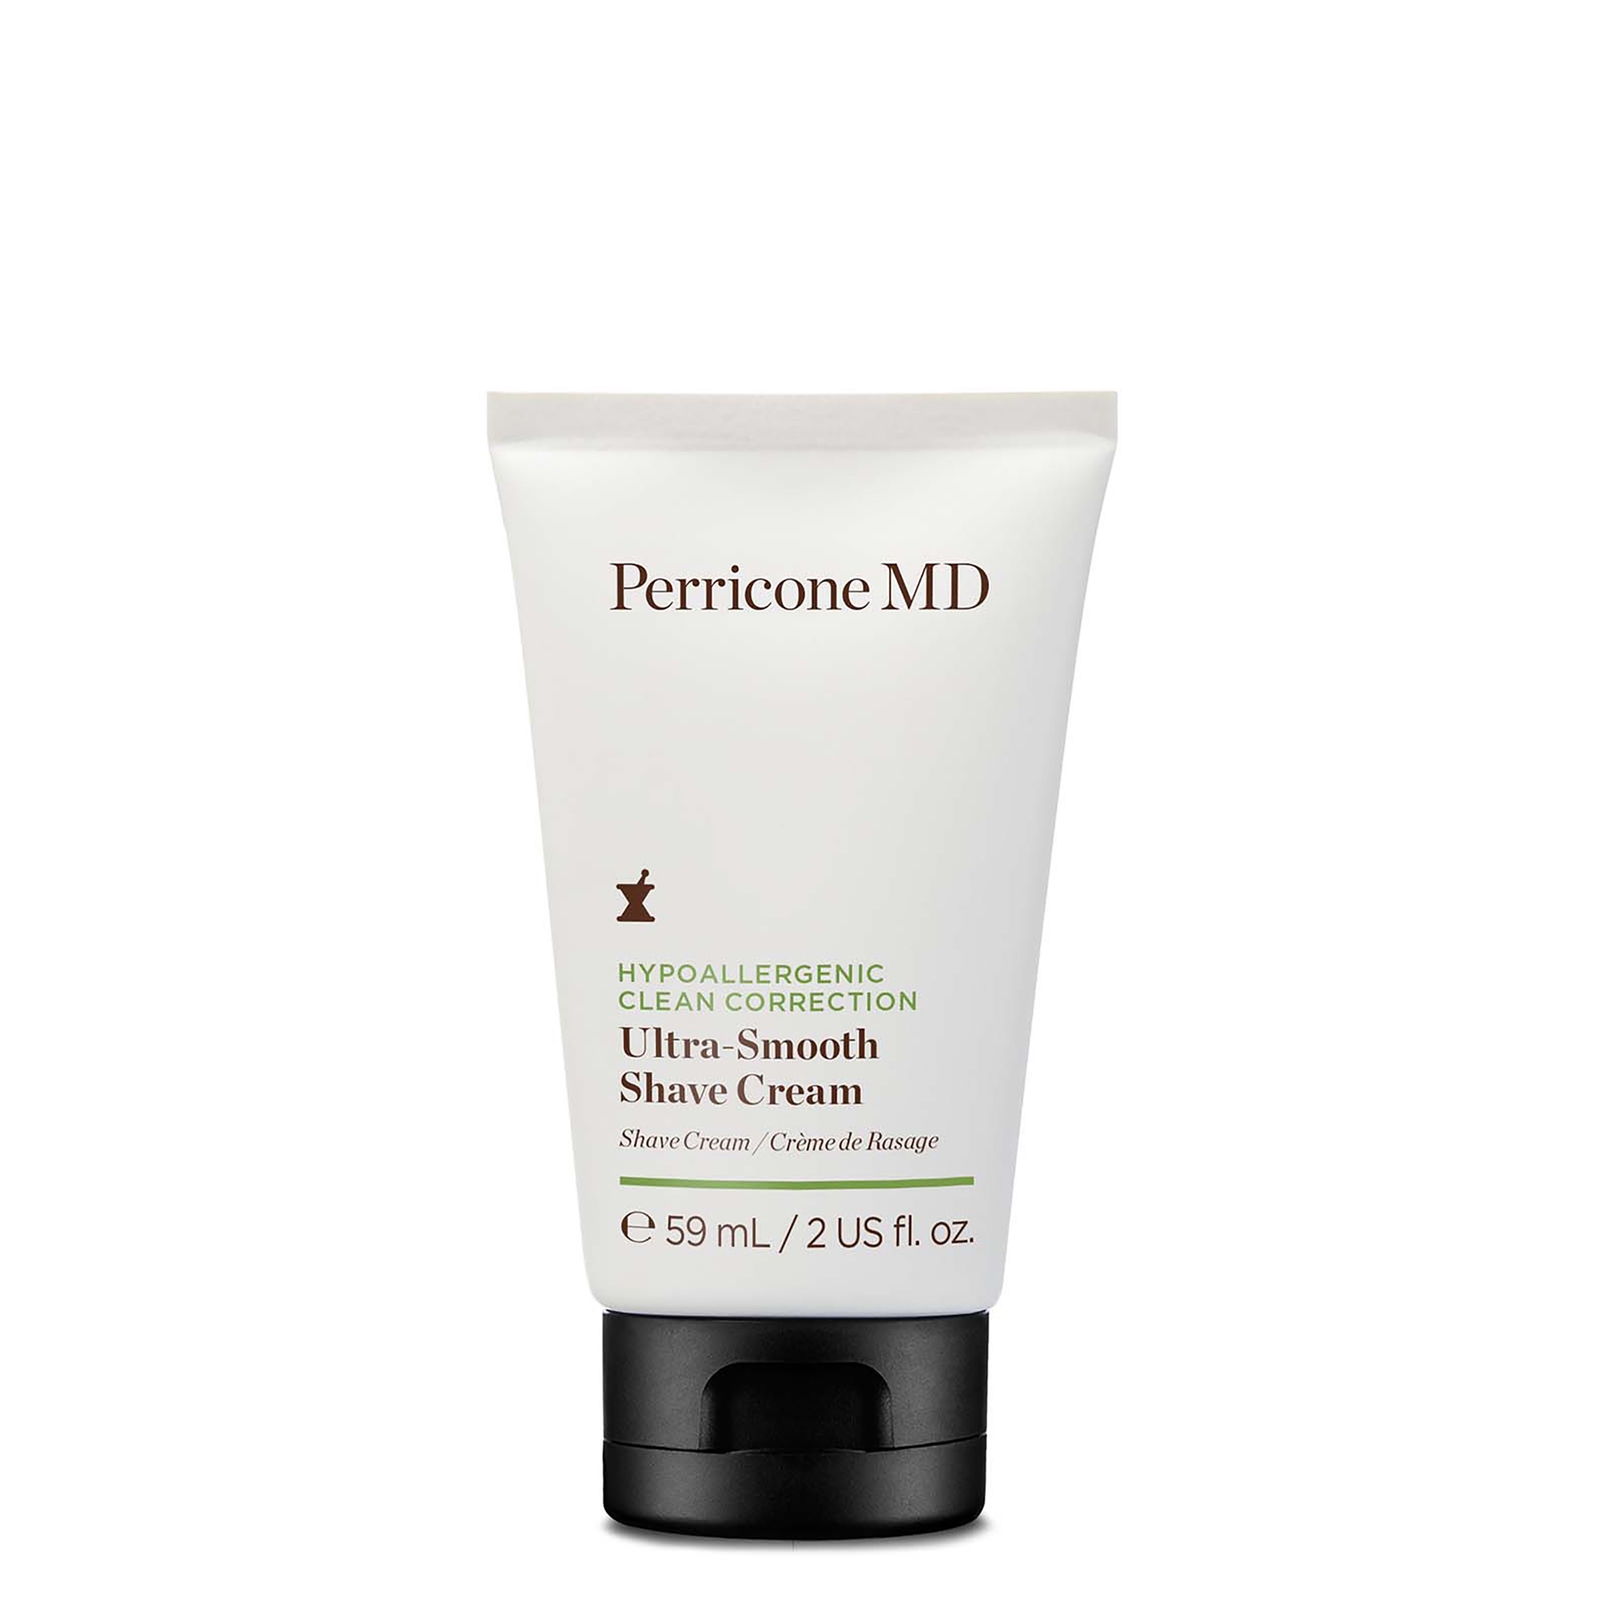 Perricone MD Hypoallergenic Clean Correction Ultra-Smooth Shave Cream (Various Sizes) - 2 oz/59ml